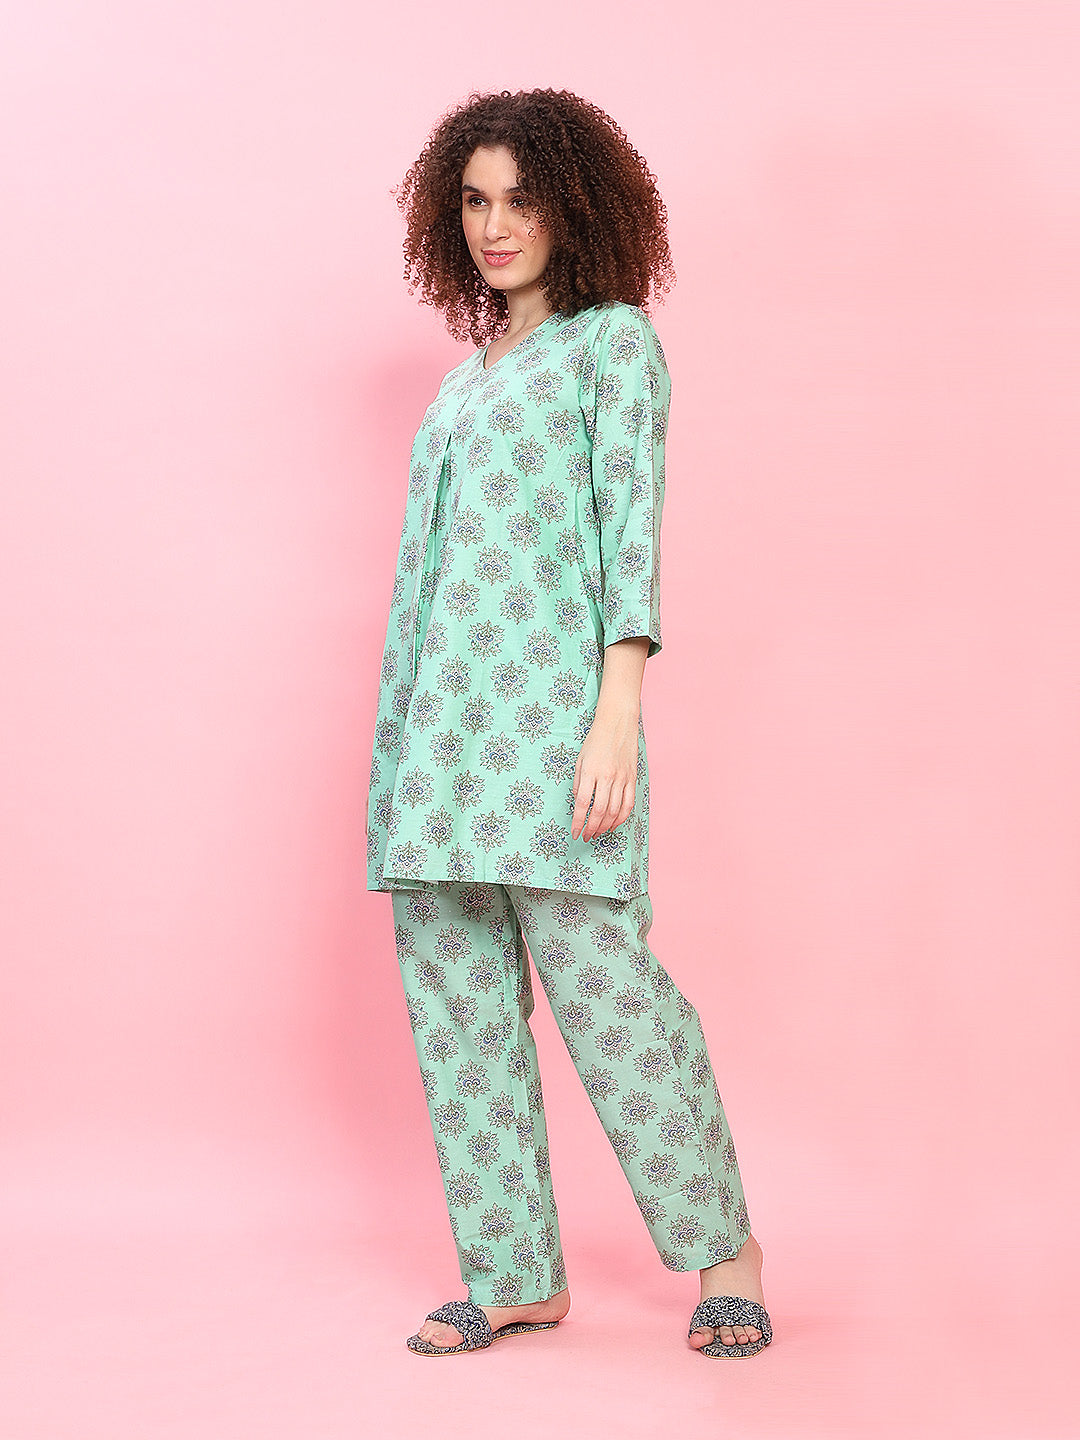 SuperSoft most comfortable 100% Mercerised compact Cotton Pajama set with Pocket. Really long lasting. You will love it. Our Guarantee.